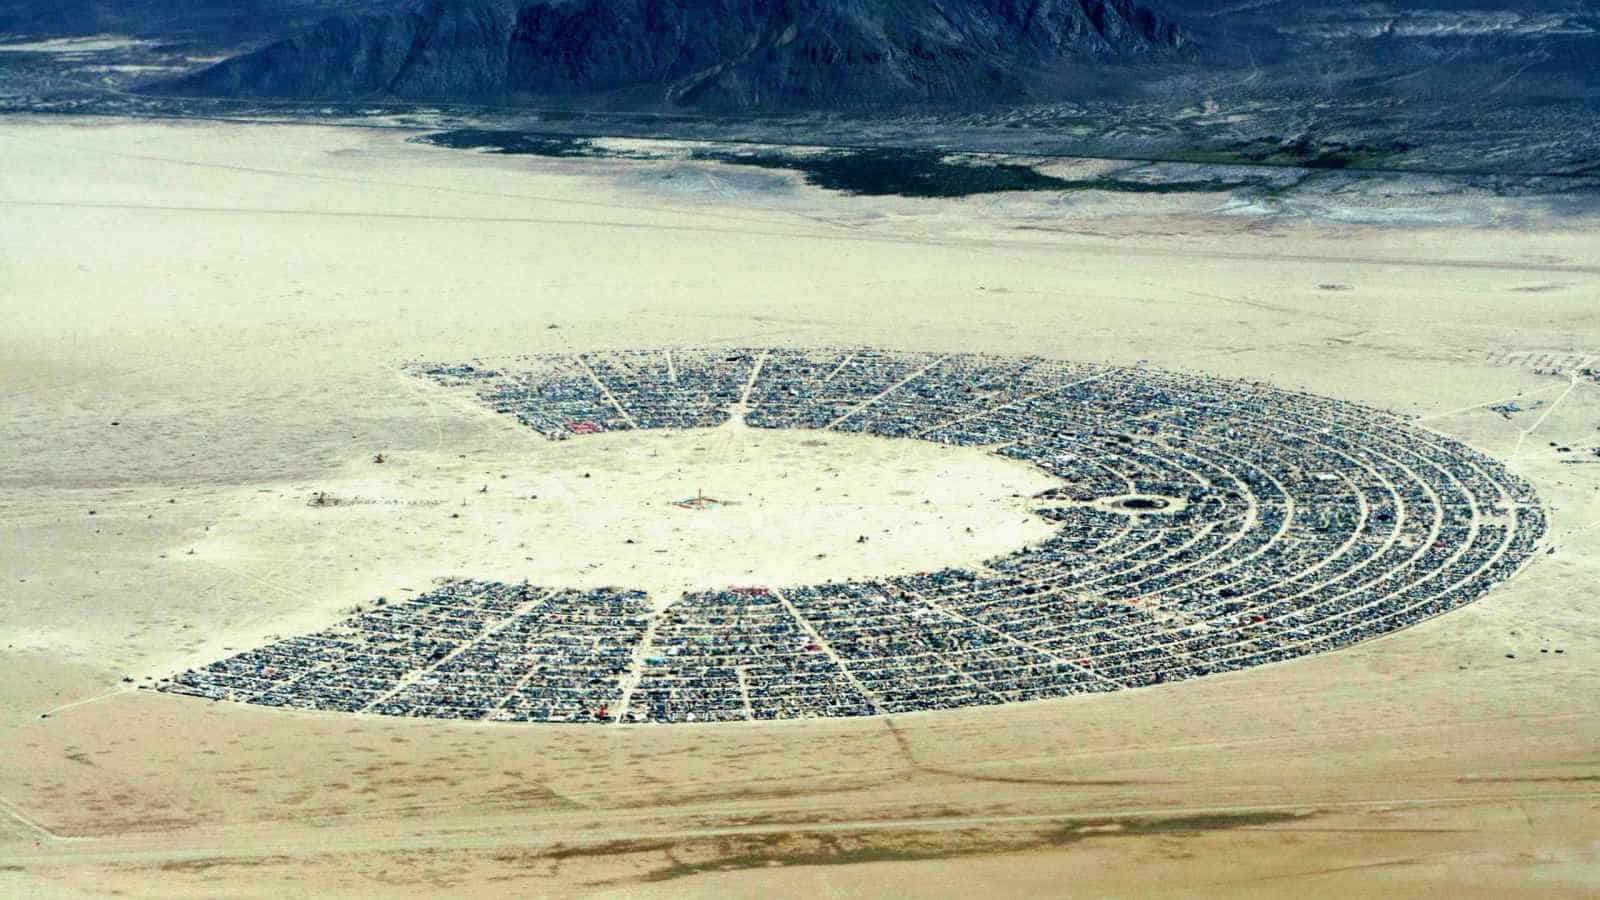 BREAKING: Tragic death reported as Burning Man struggles amid extreme weather